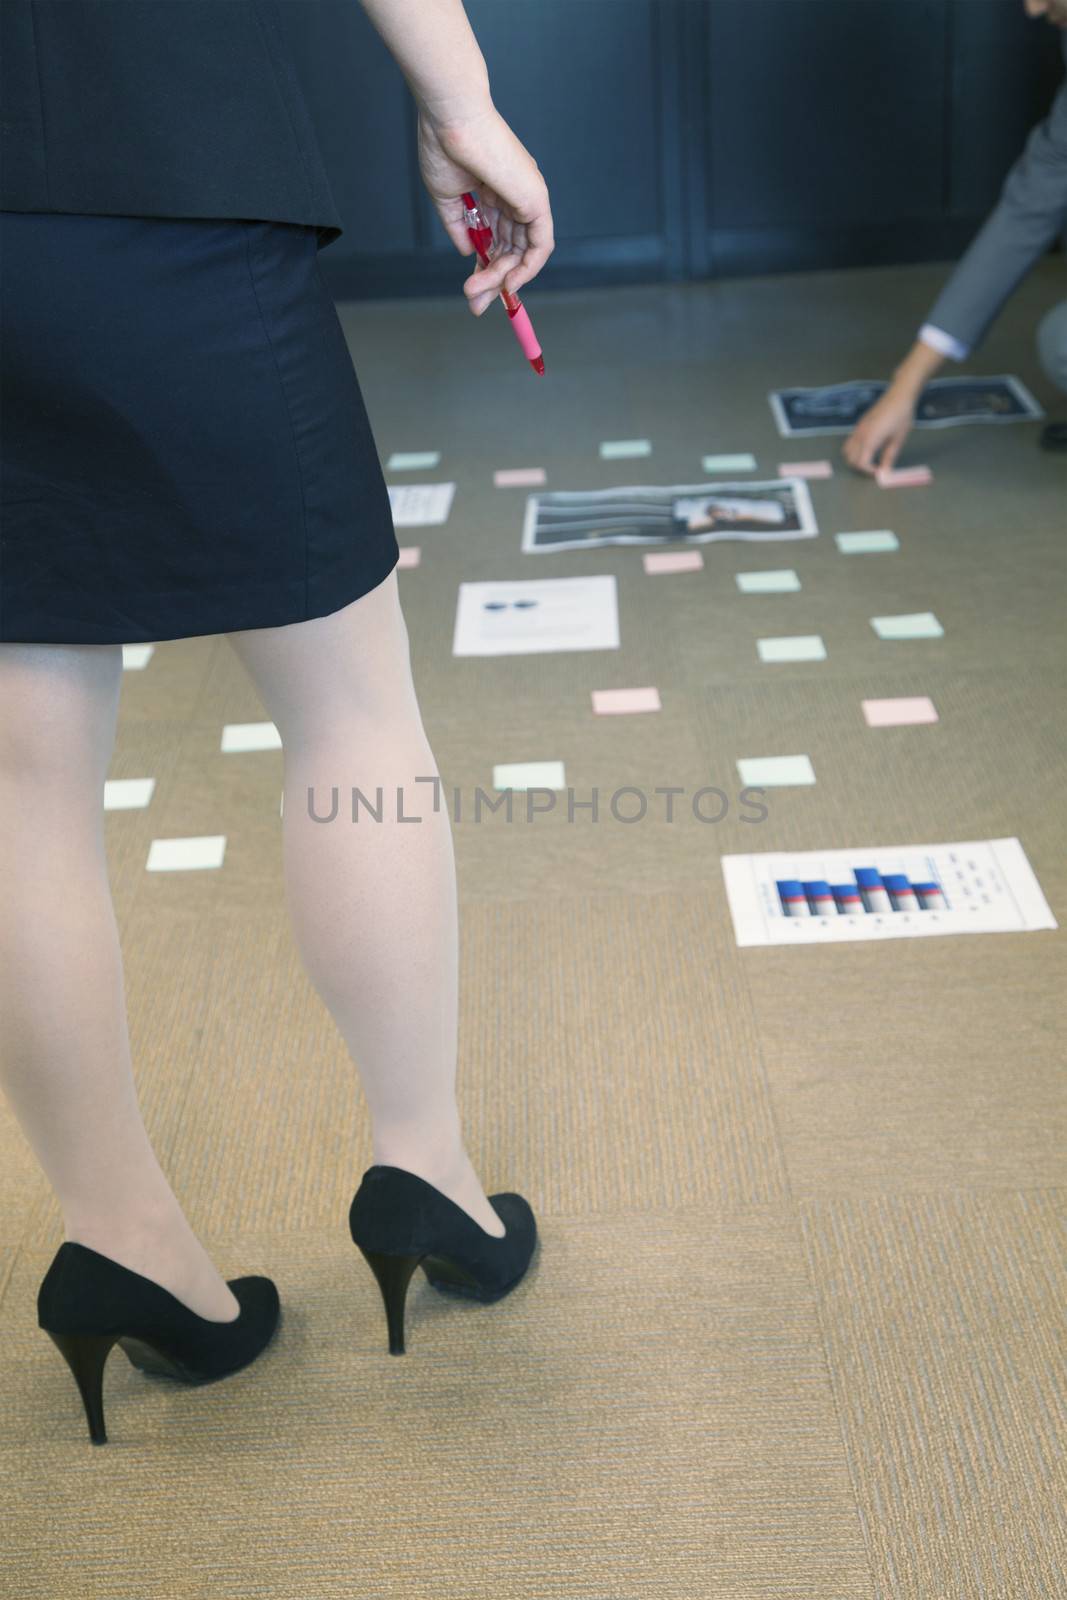 Brainstorming session on the office floor